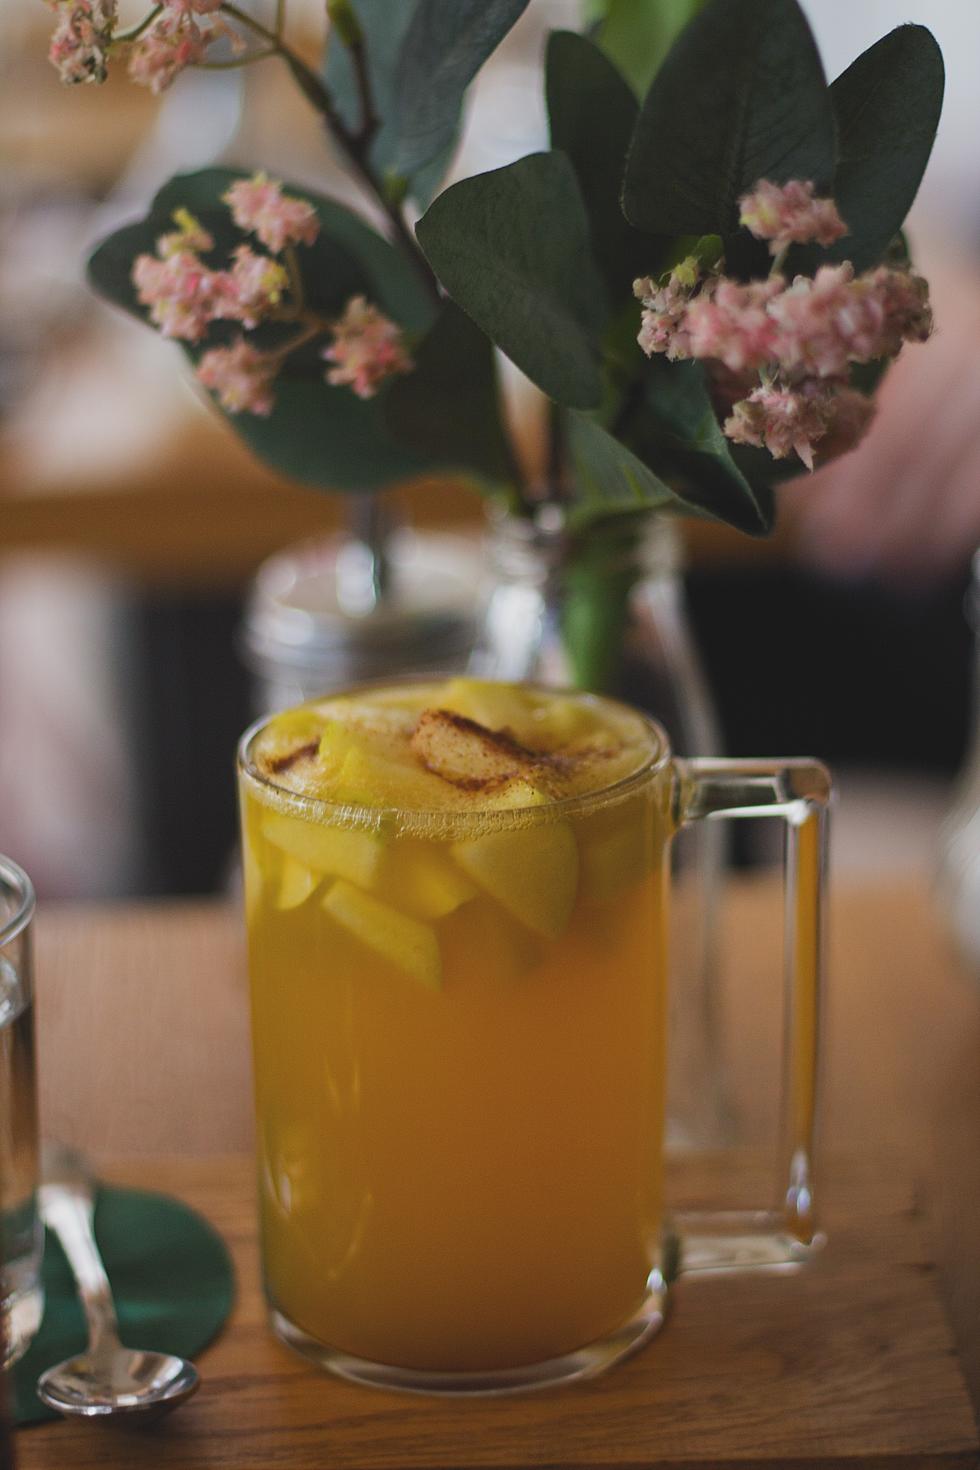 How Does Montana Do The Hot Toddy? A Couple Recipes To Check Out